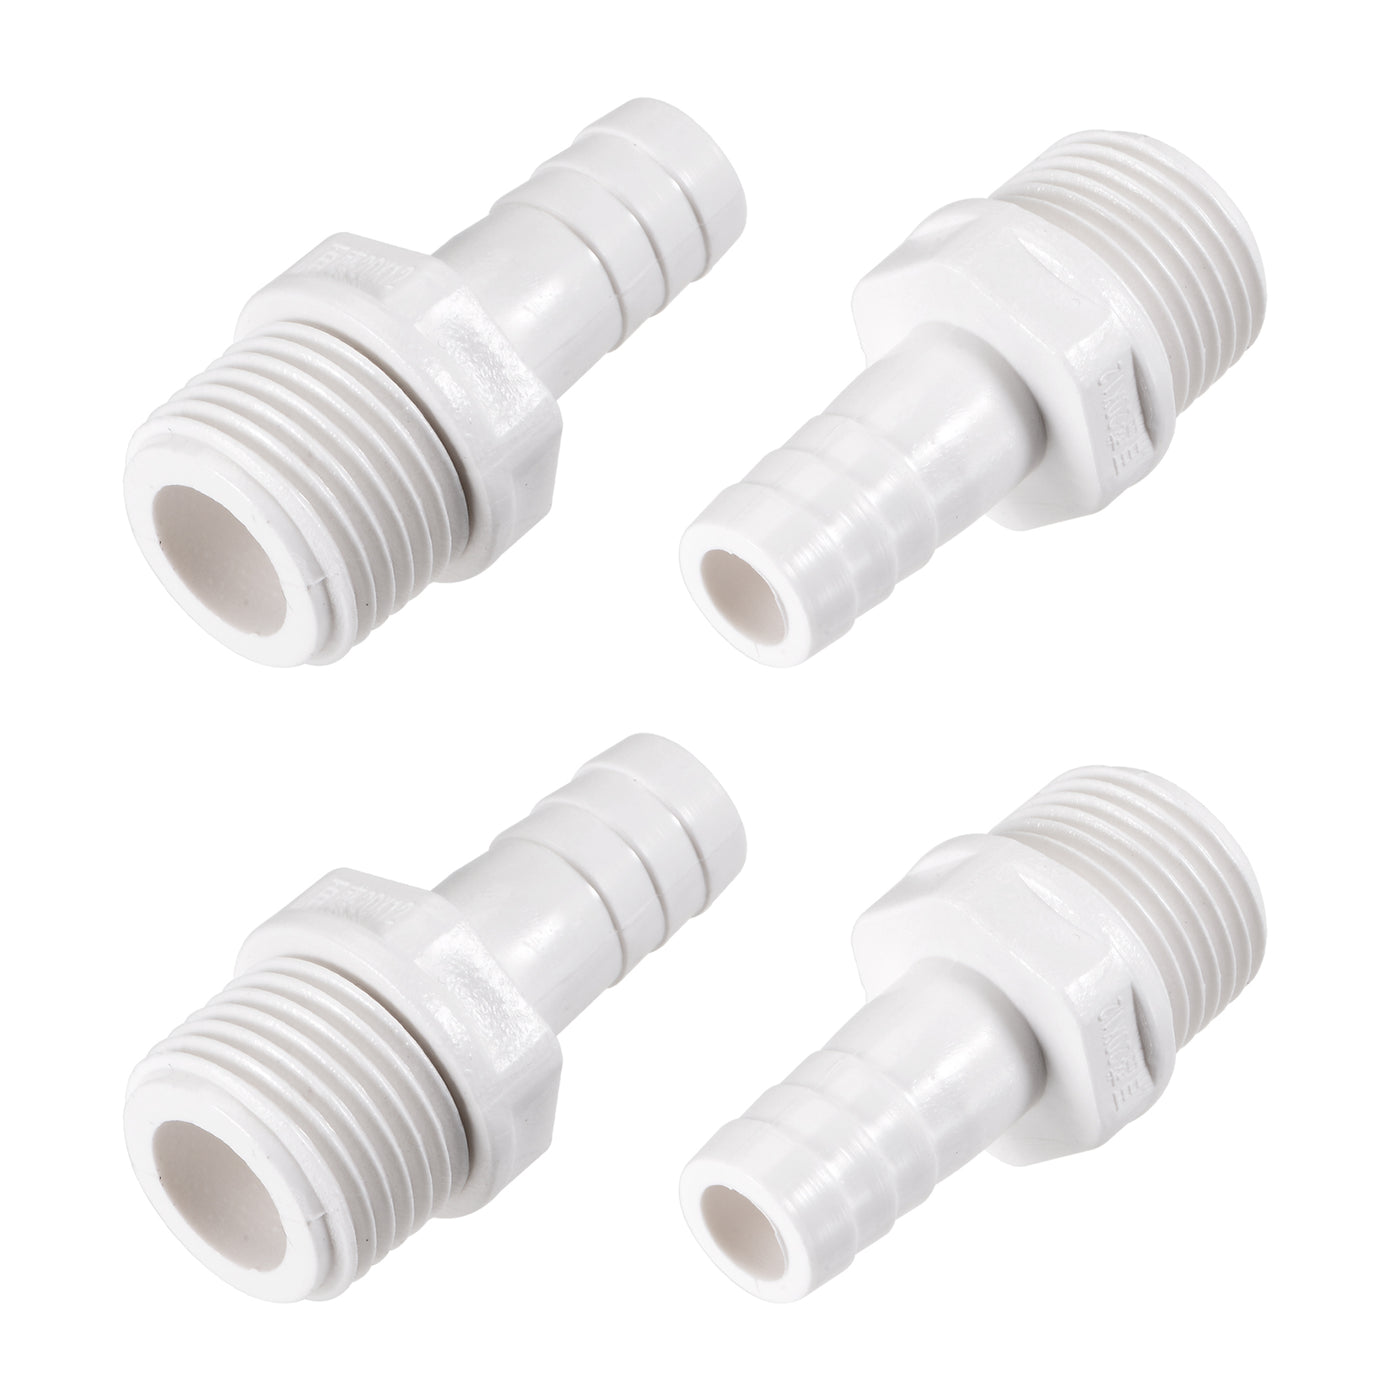 uxcell Uxcell PVC Tube Fitting Adapter 12mm Barbed x G1/2 Male White for Aquariums, Water Tanks, Tubs, Pools 4Pcs